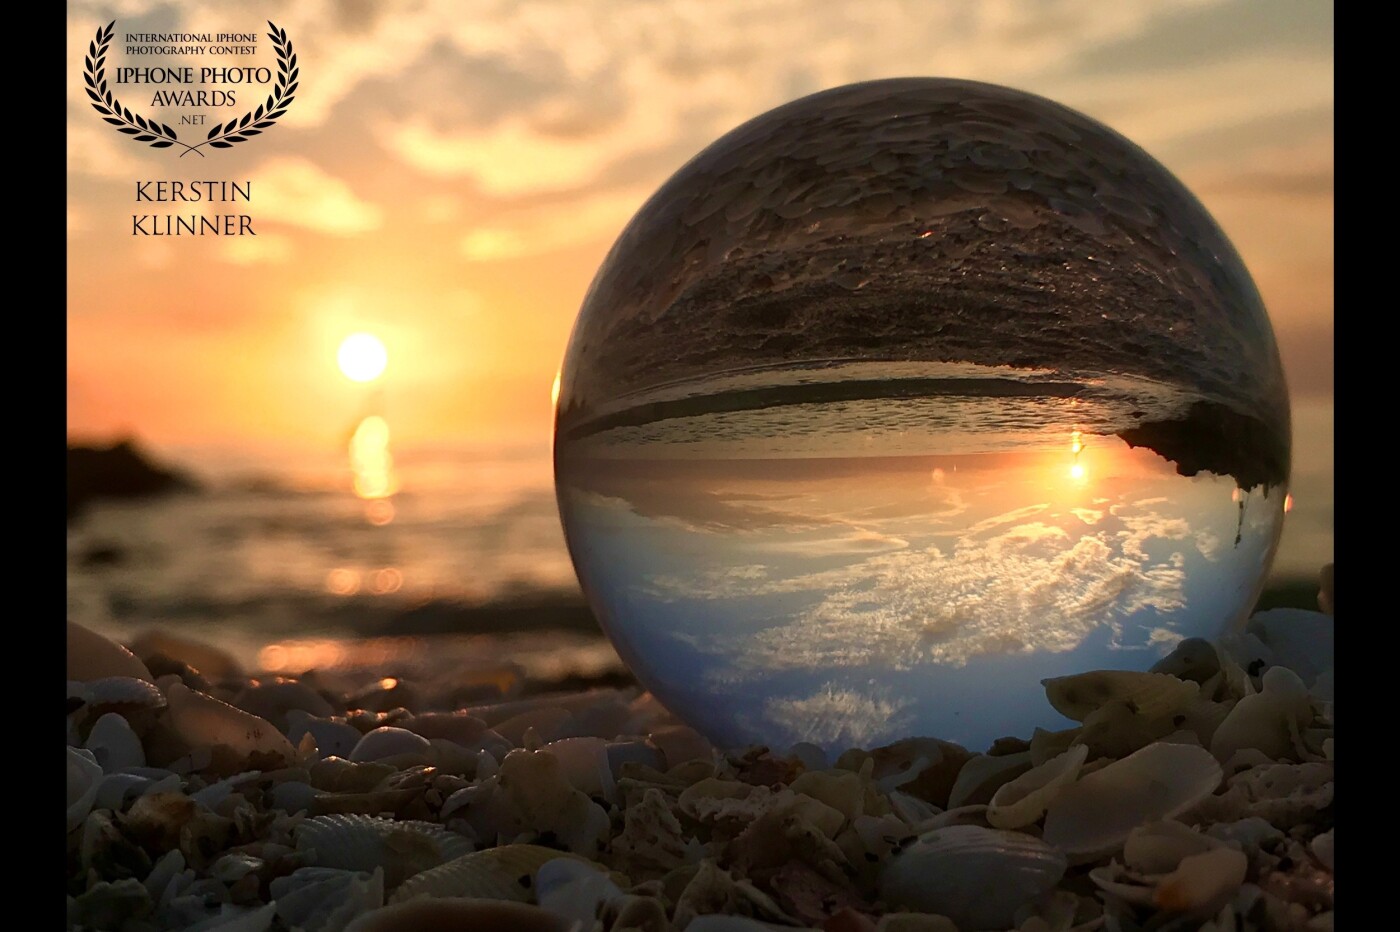 This sunset reminds me of a time when traveling was still possible. The glass ball is located at one of the most beautiful beaches of Florida - Turner Beach at Captiva Island.